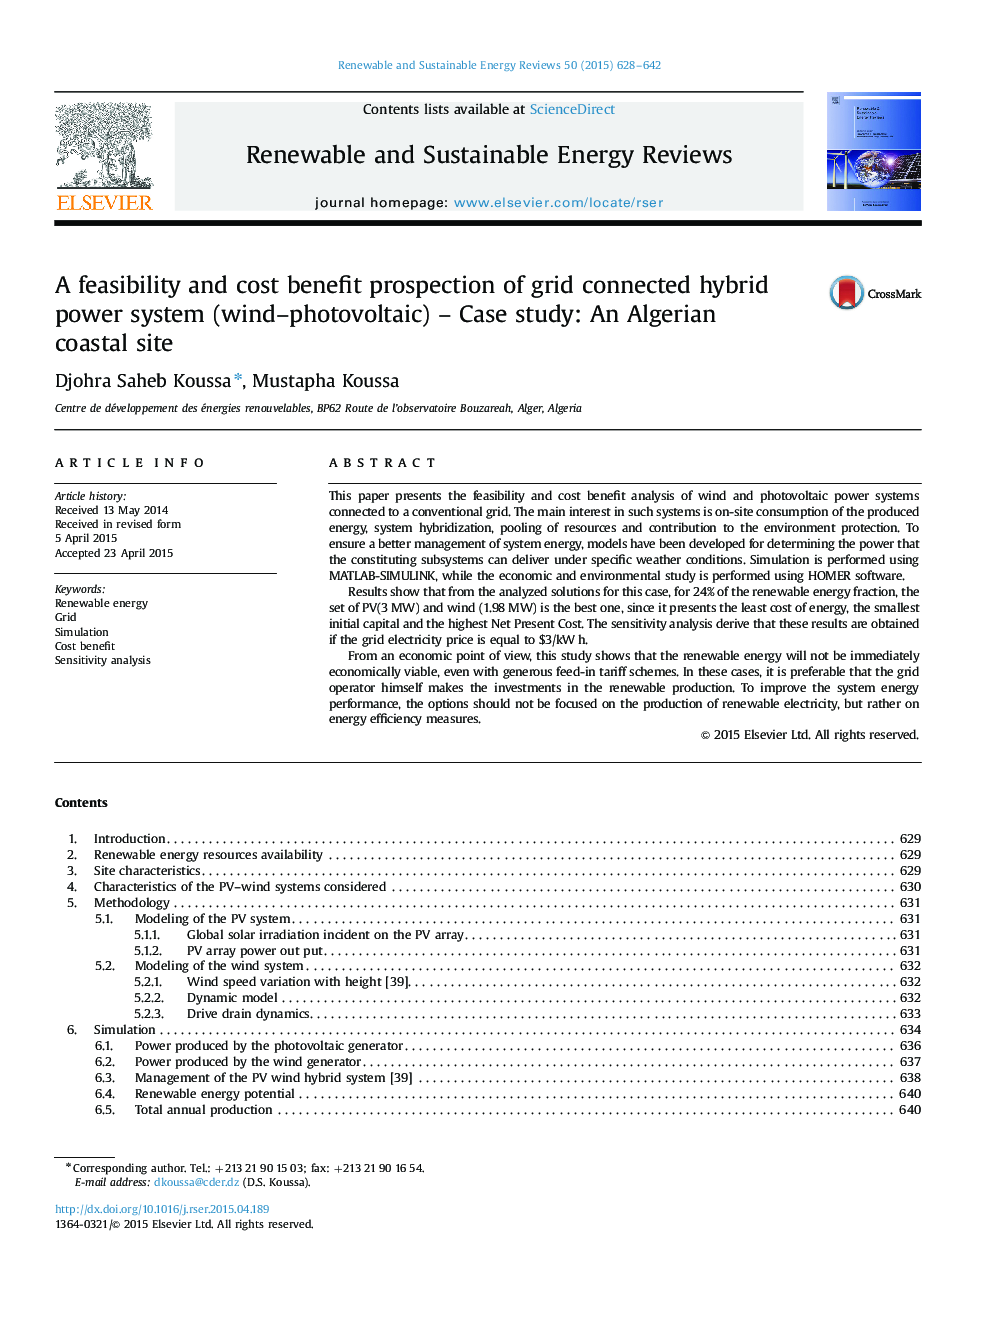 A feasibility and cost benefit prospection of grid connected hybrid power system (wind-photovoltaic) - Case study: An Algerian coastal site